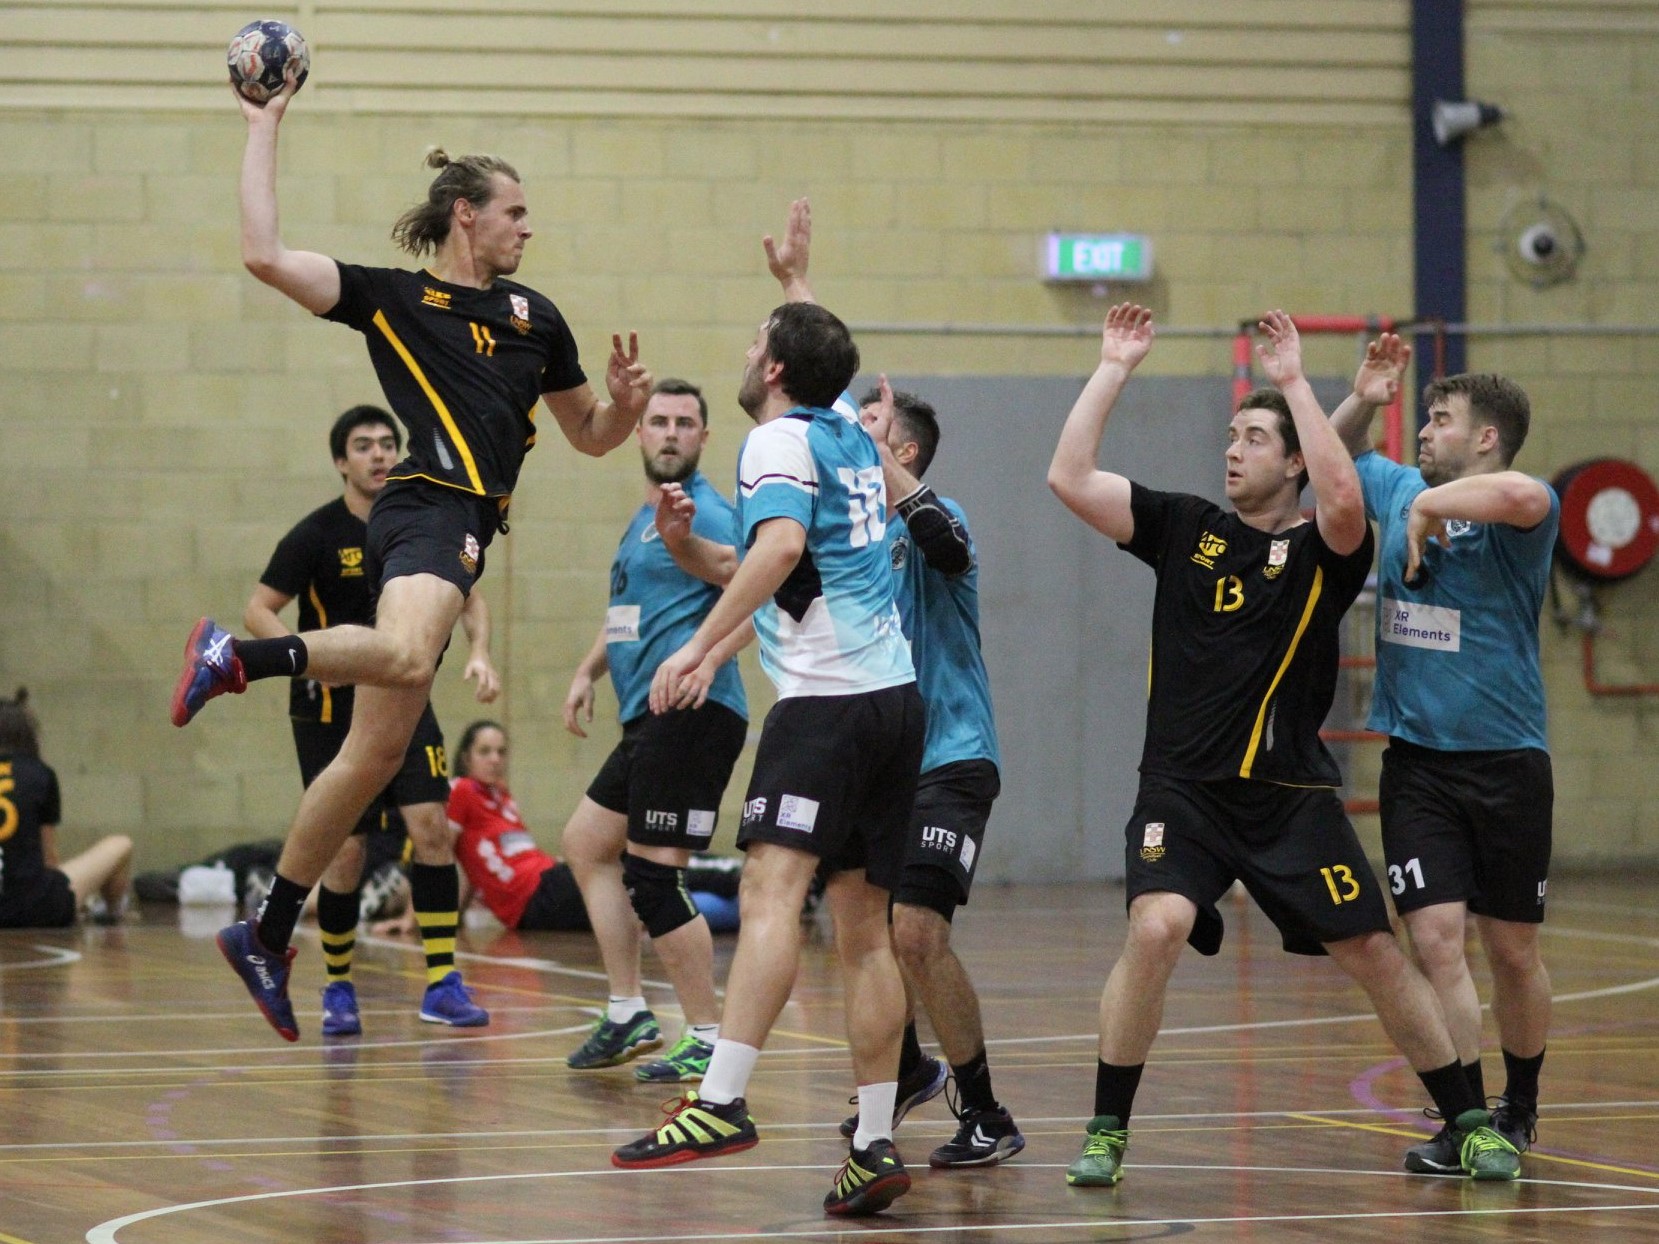 An international community - French national Jules Grimont scored 5 point for UNSW last week